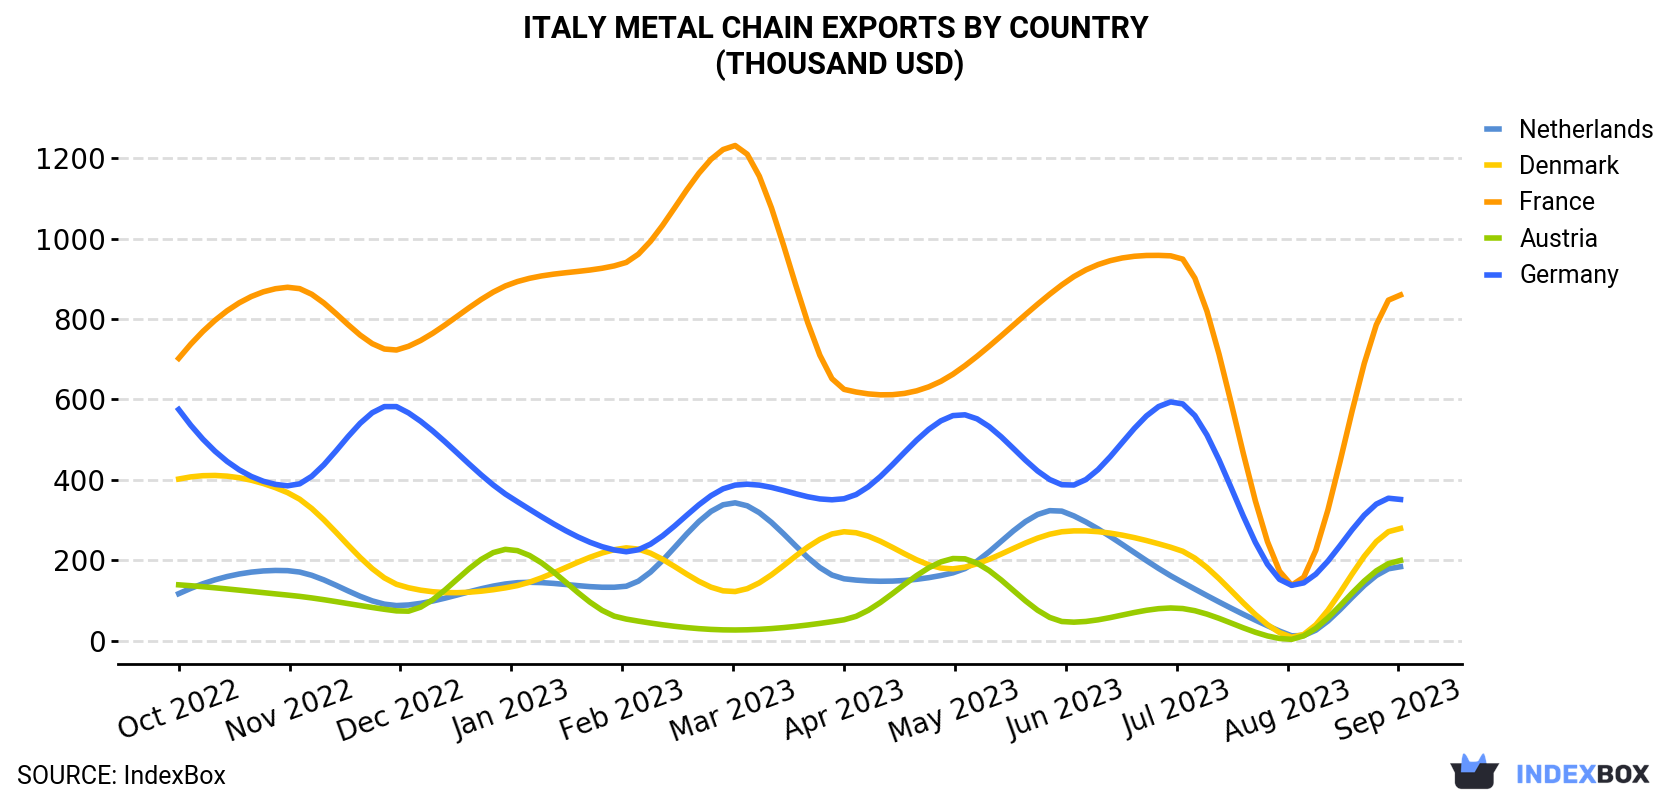 Italy Metal Chain Exports By Country (Thousand USD)